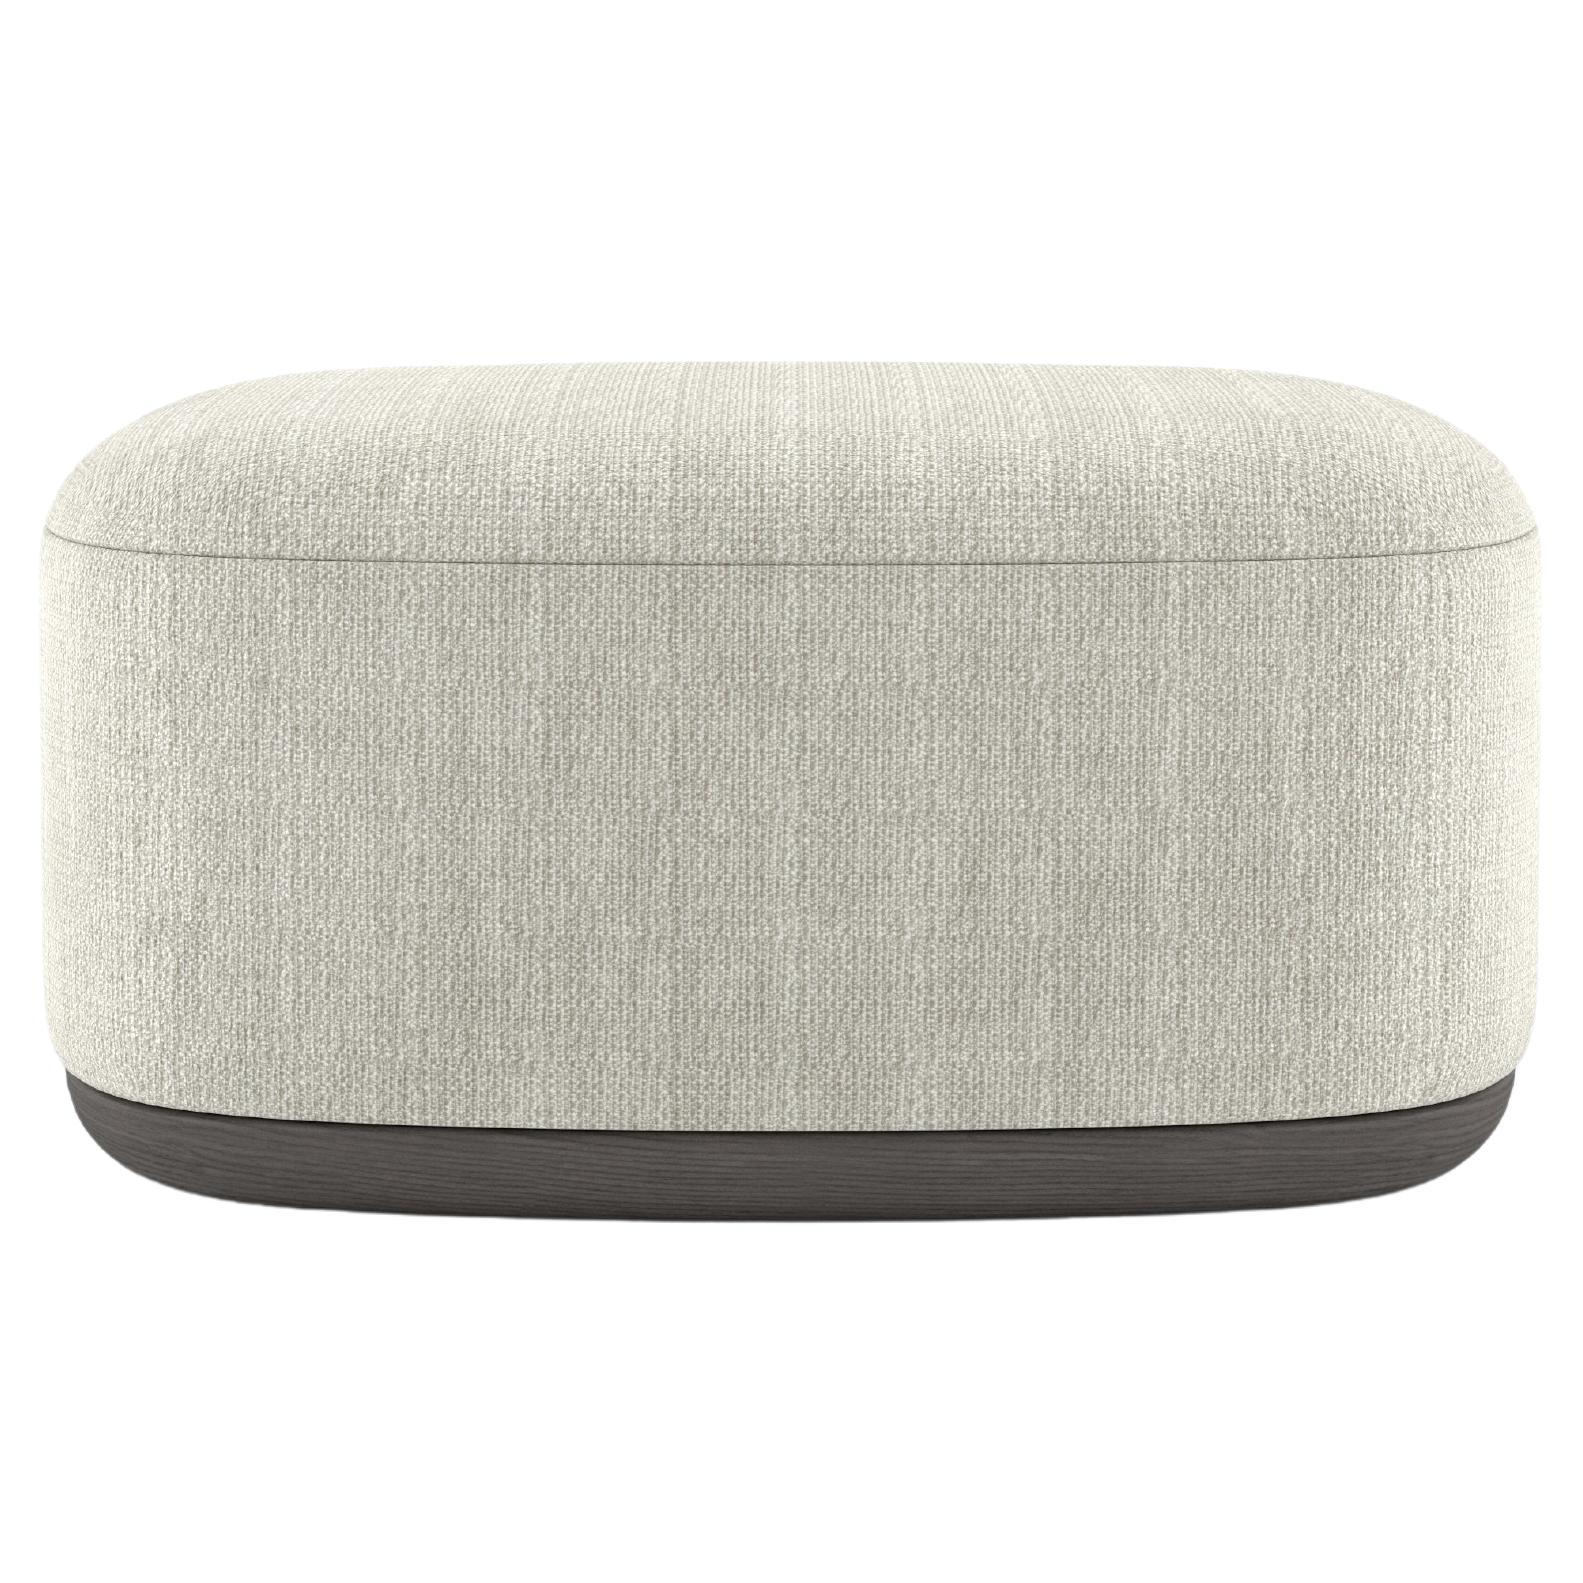 Contemporary Ottoman 'Unio' by Poiat, Fabric Fox 02 by Larsen For Sale